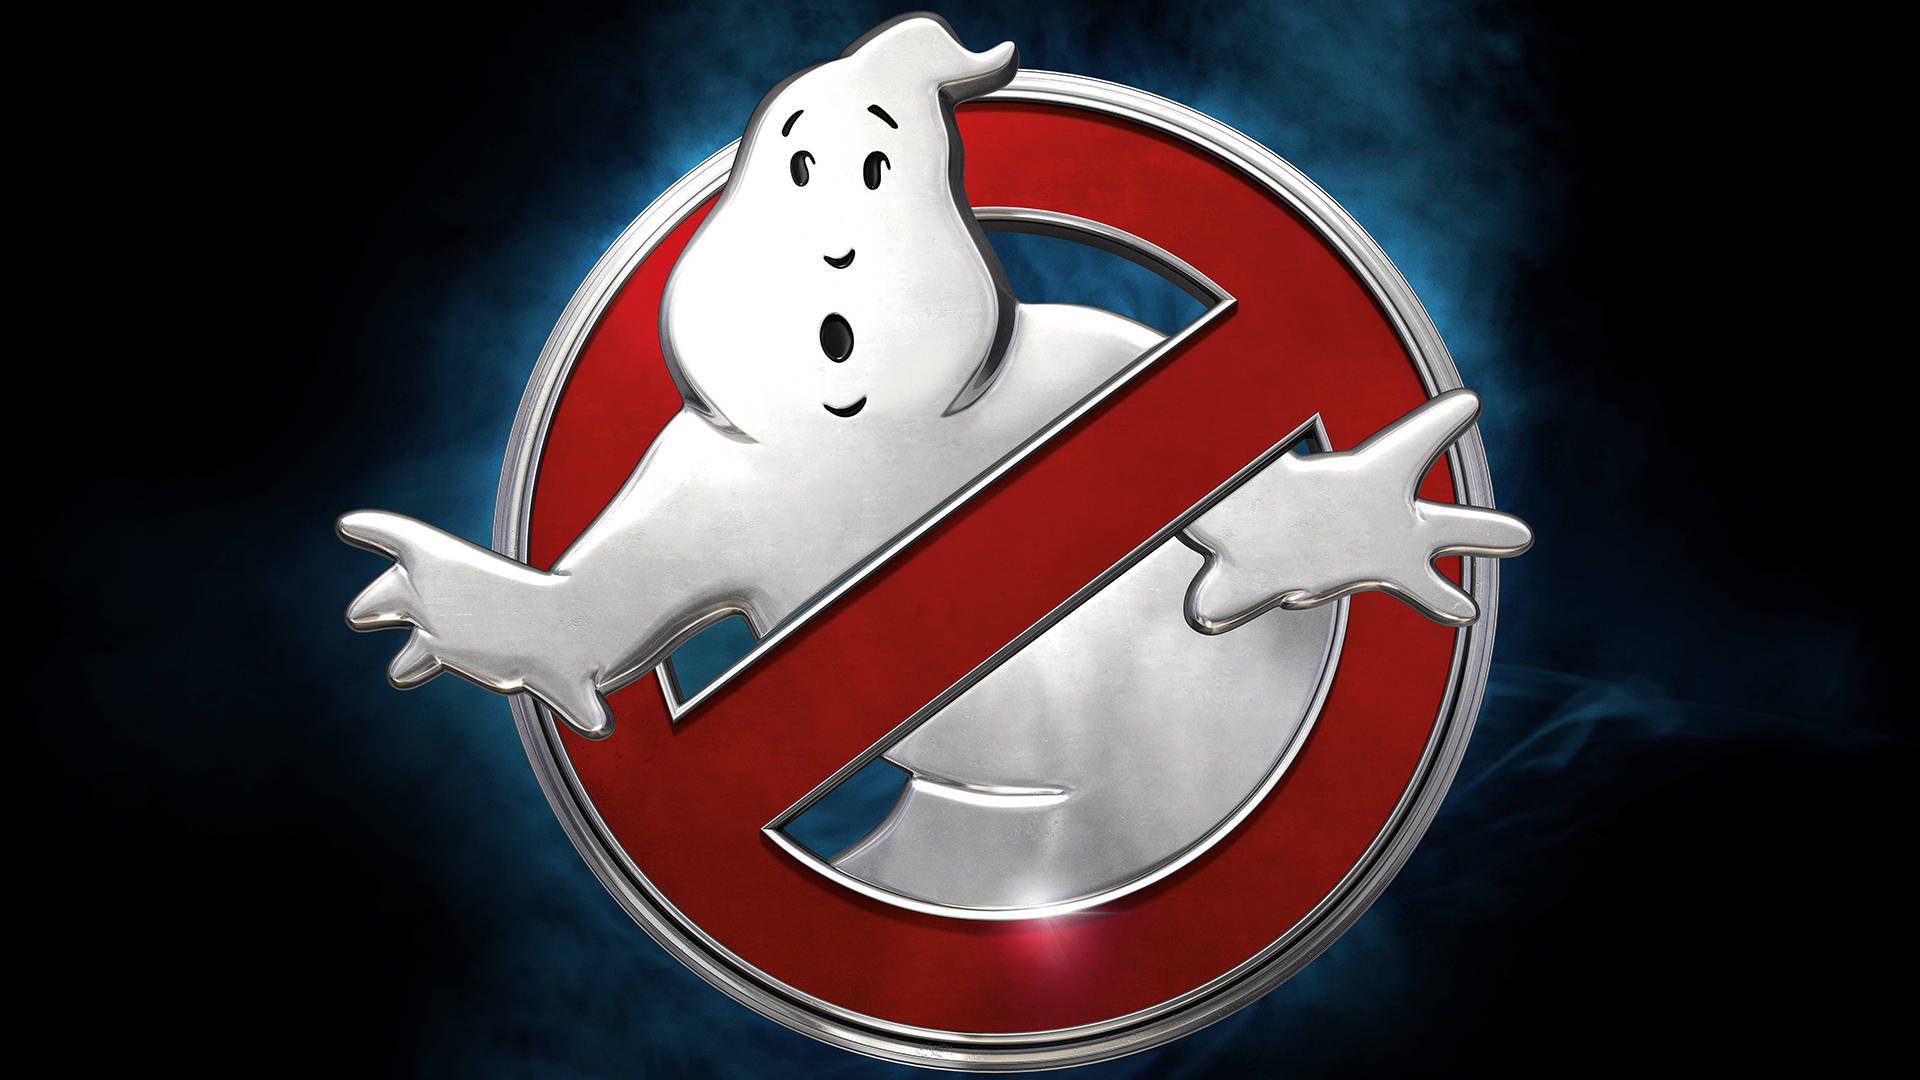 [100+] Ghostbusters Wallpapers